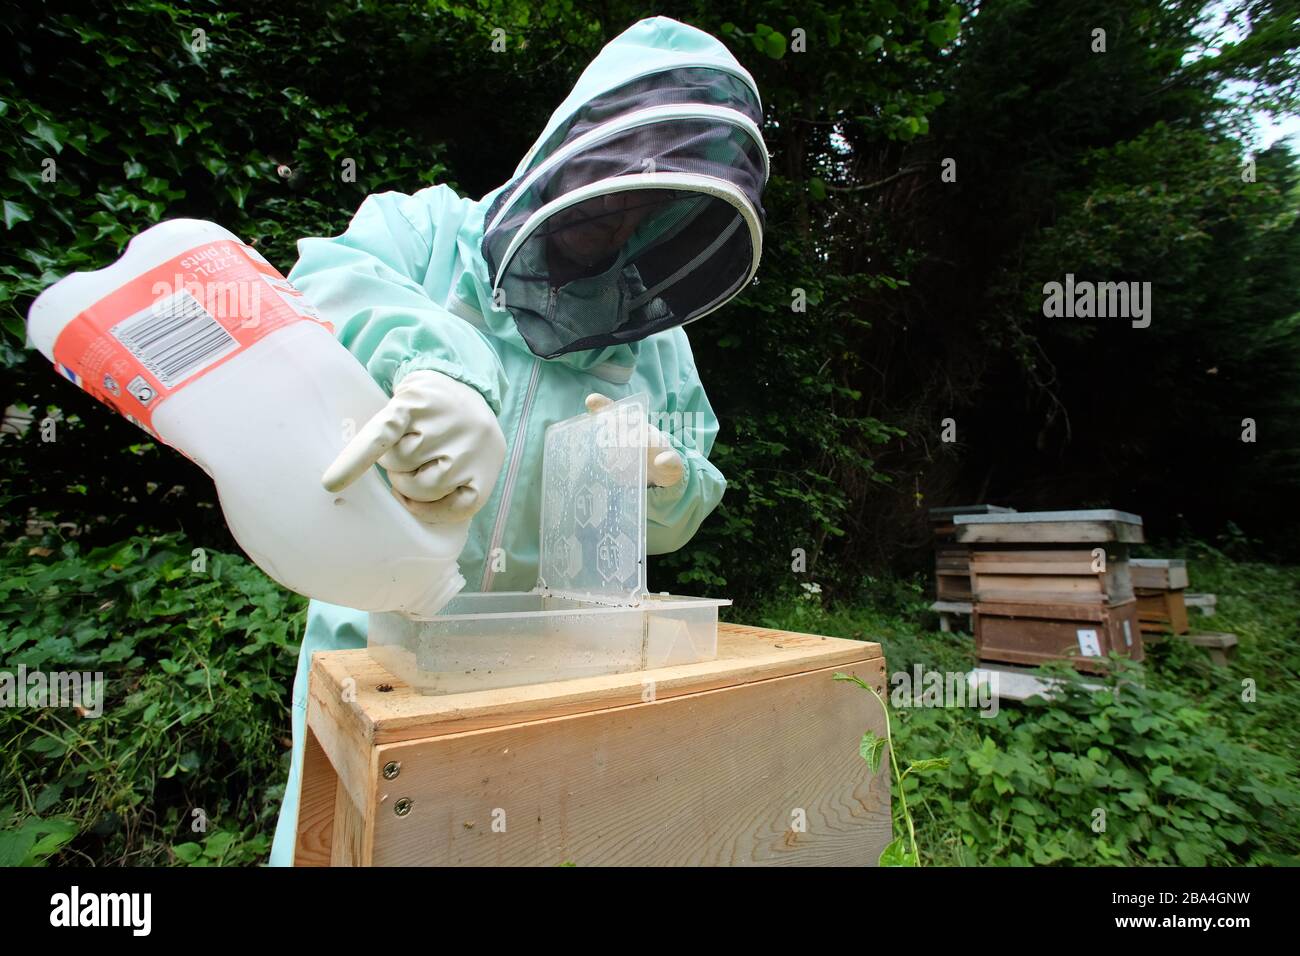 Amateur bee keeper feeding sugar to supplement food for the hives. UK Stock Photo